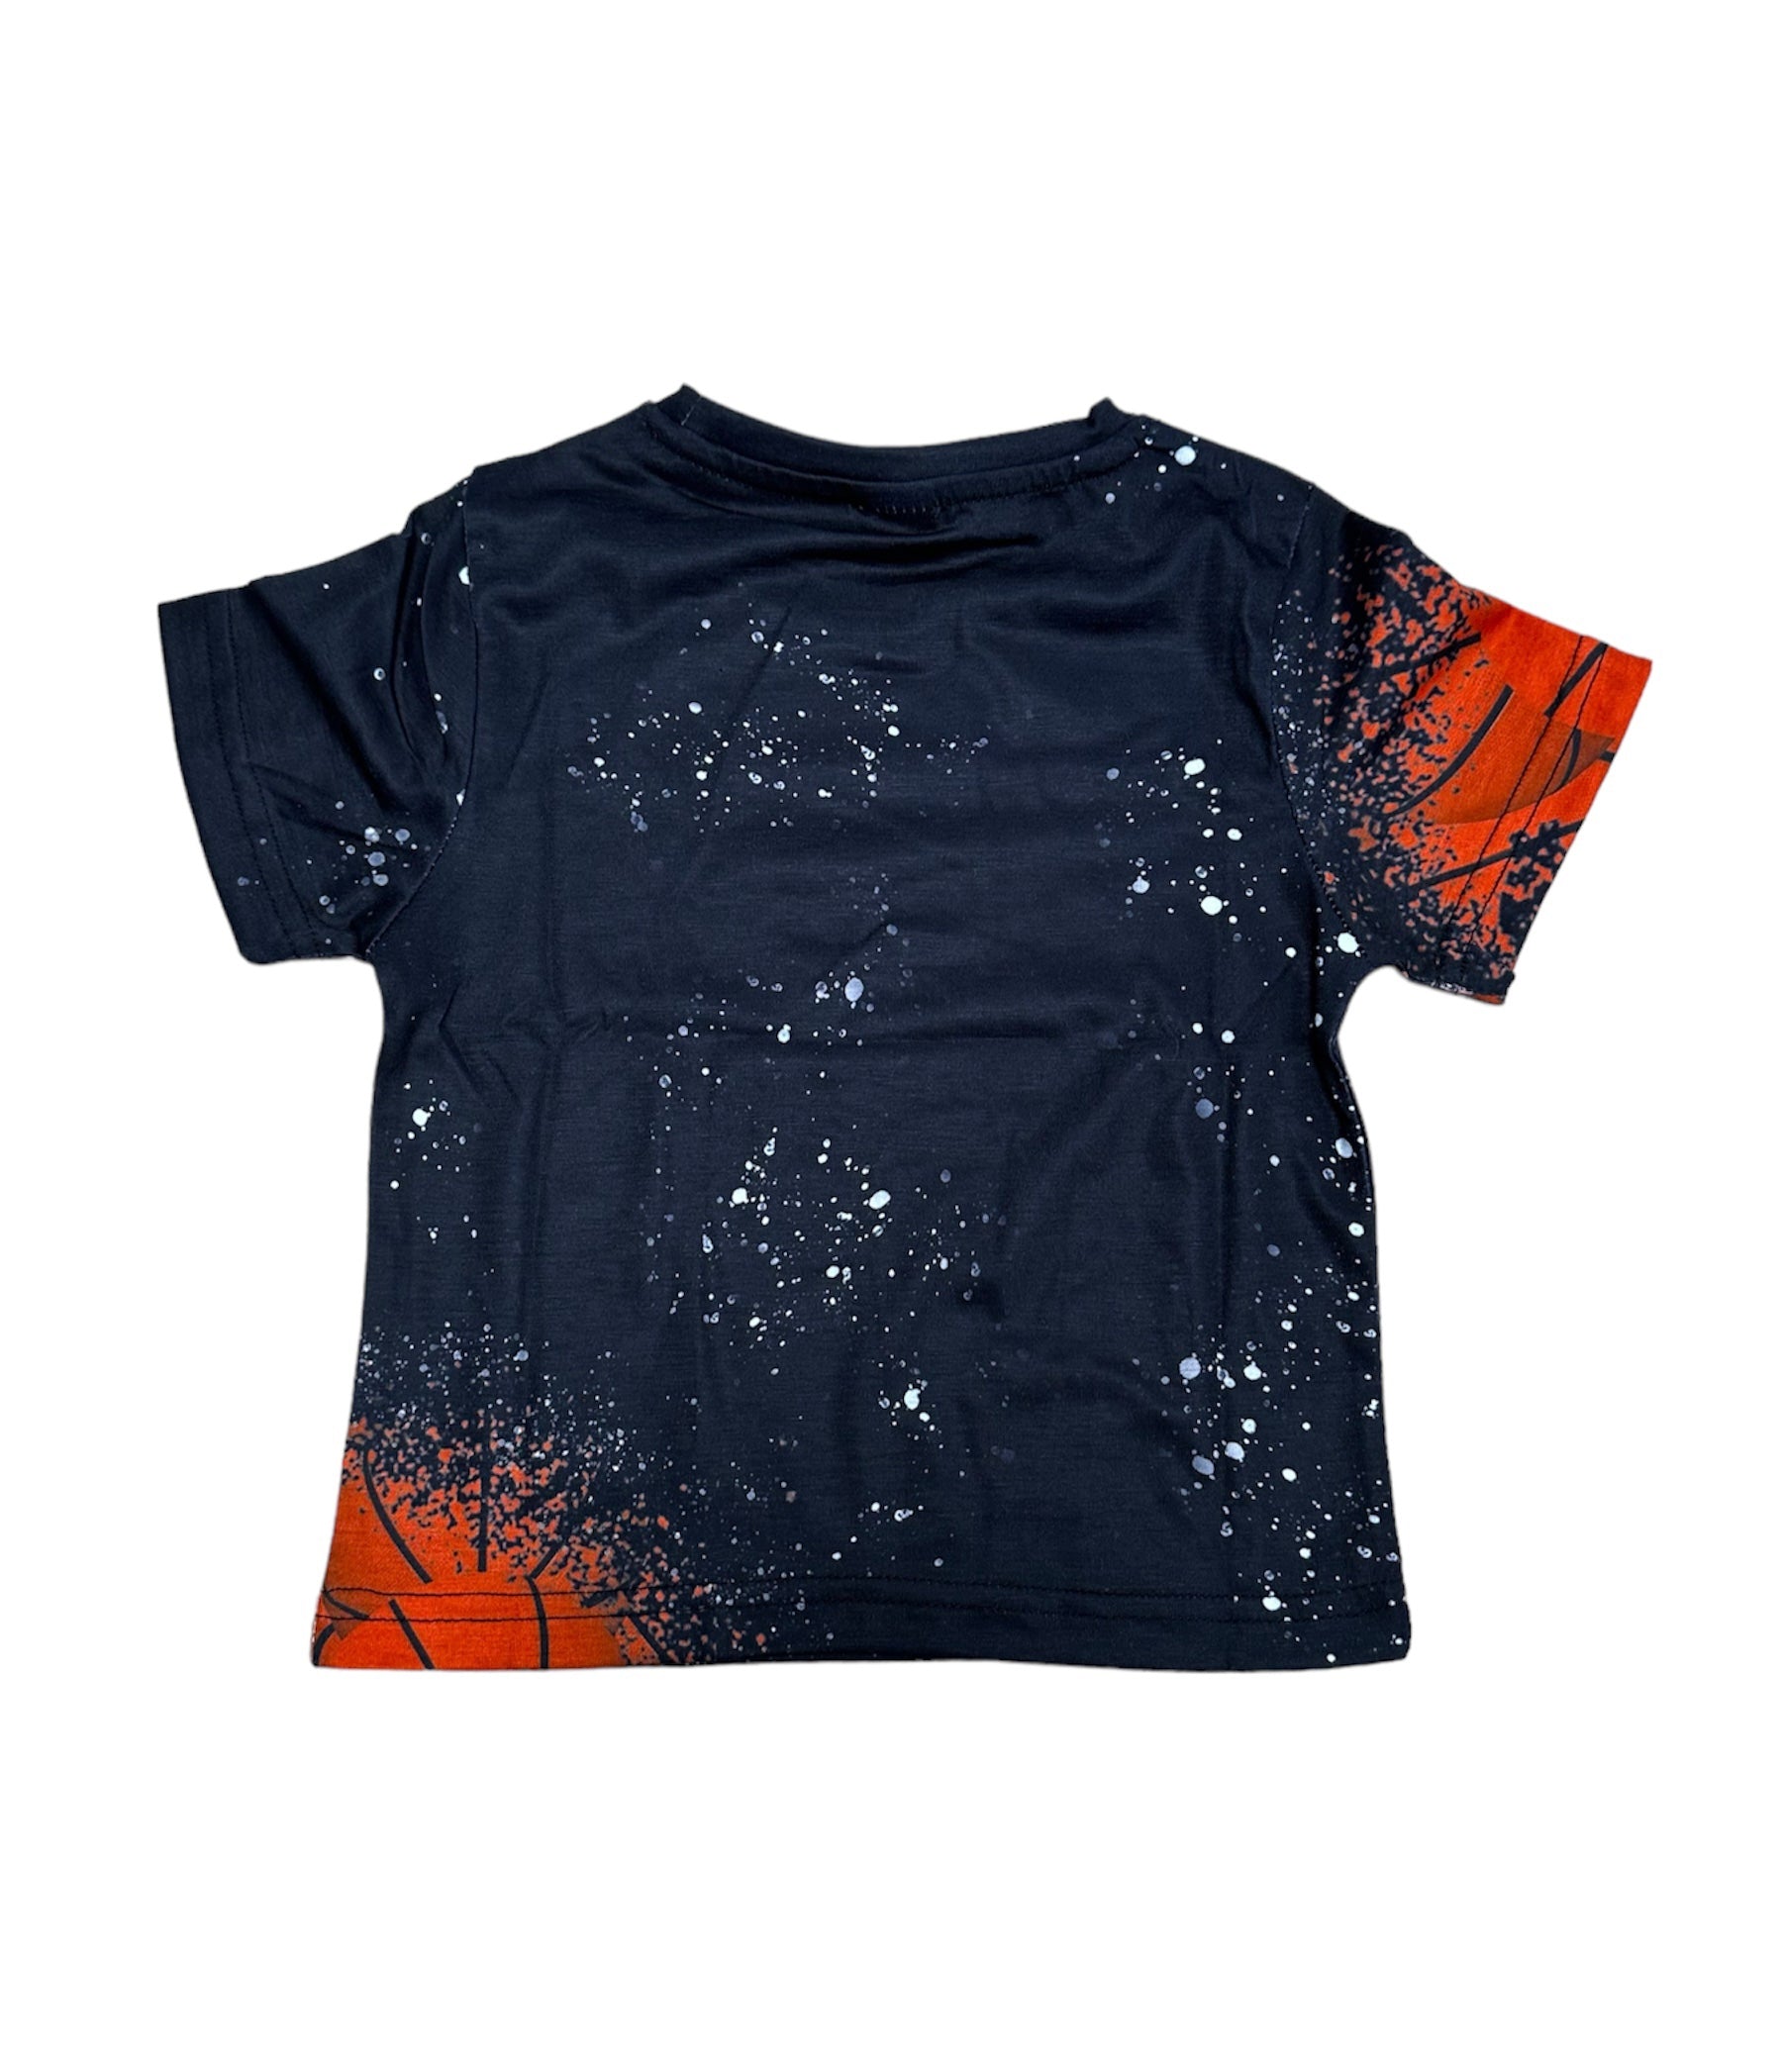 Youth Tie Dye Bleach T-shirt Sublimation Blank